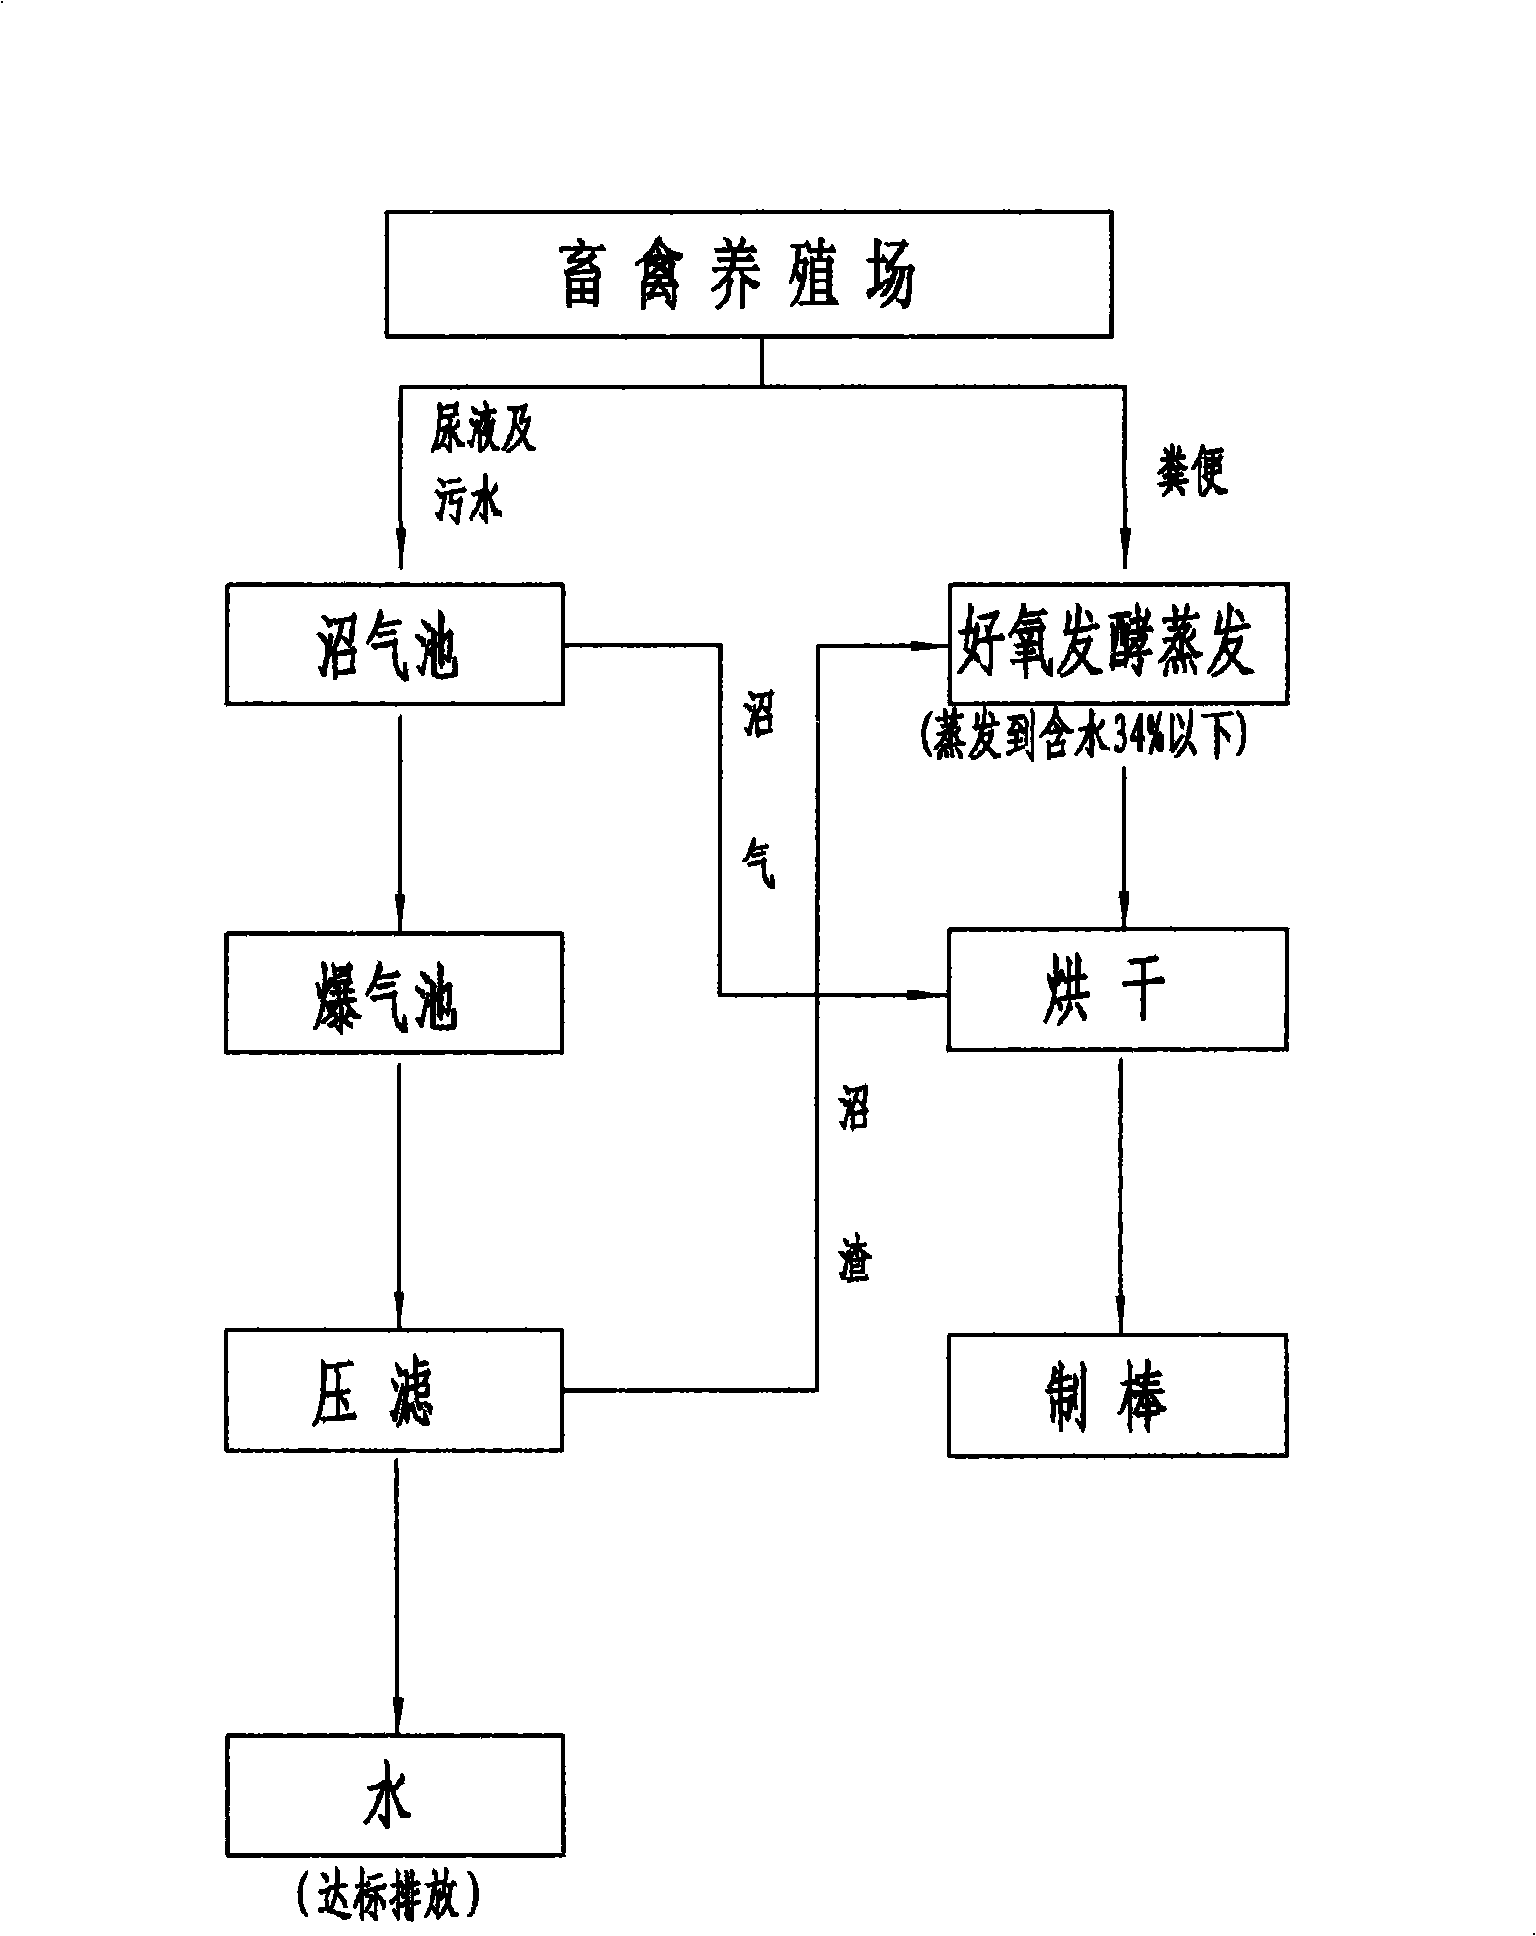 Circulation processing method for poultry and livestock manure